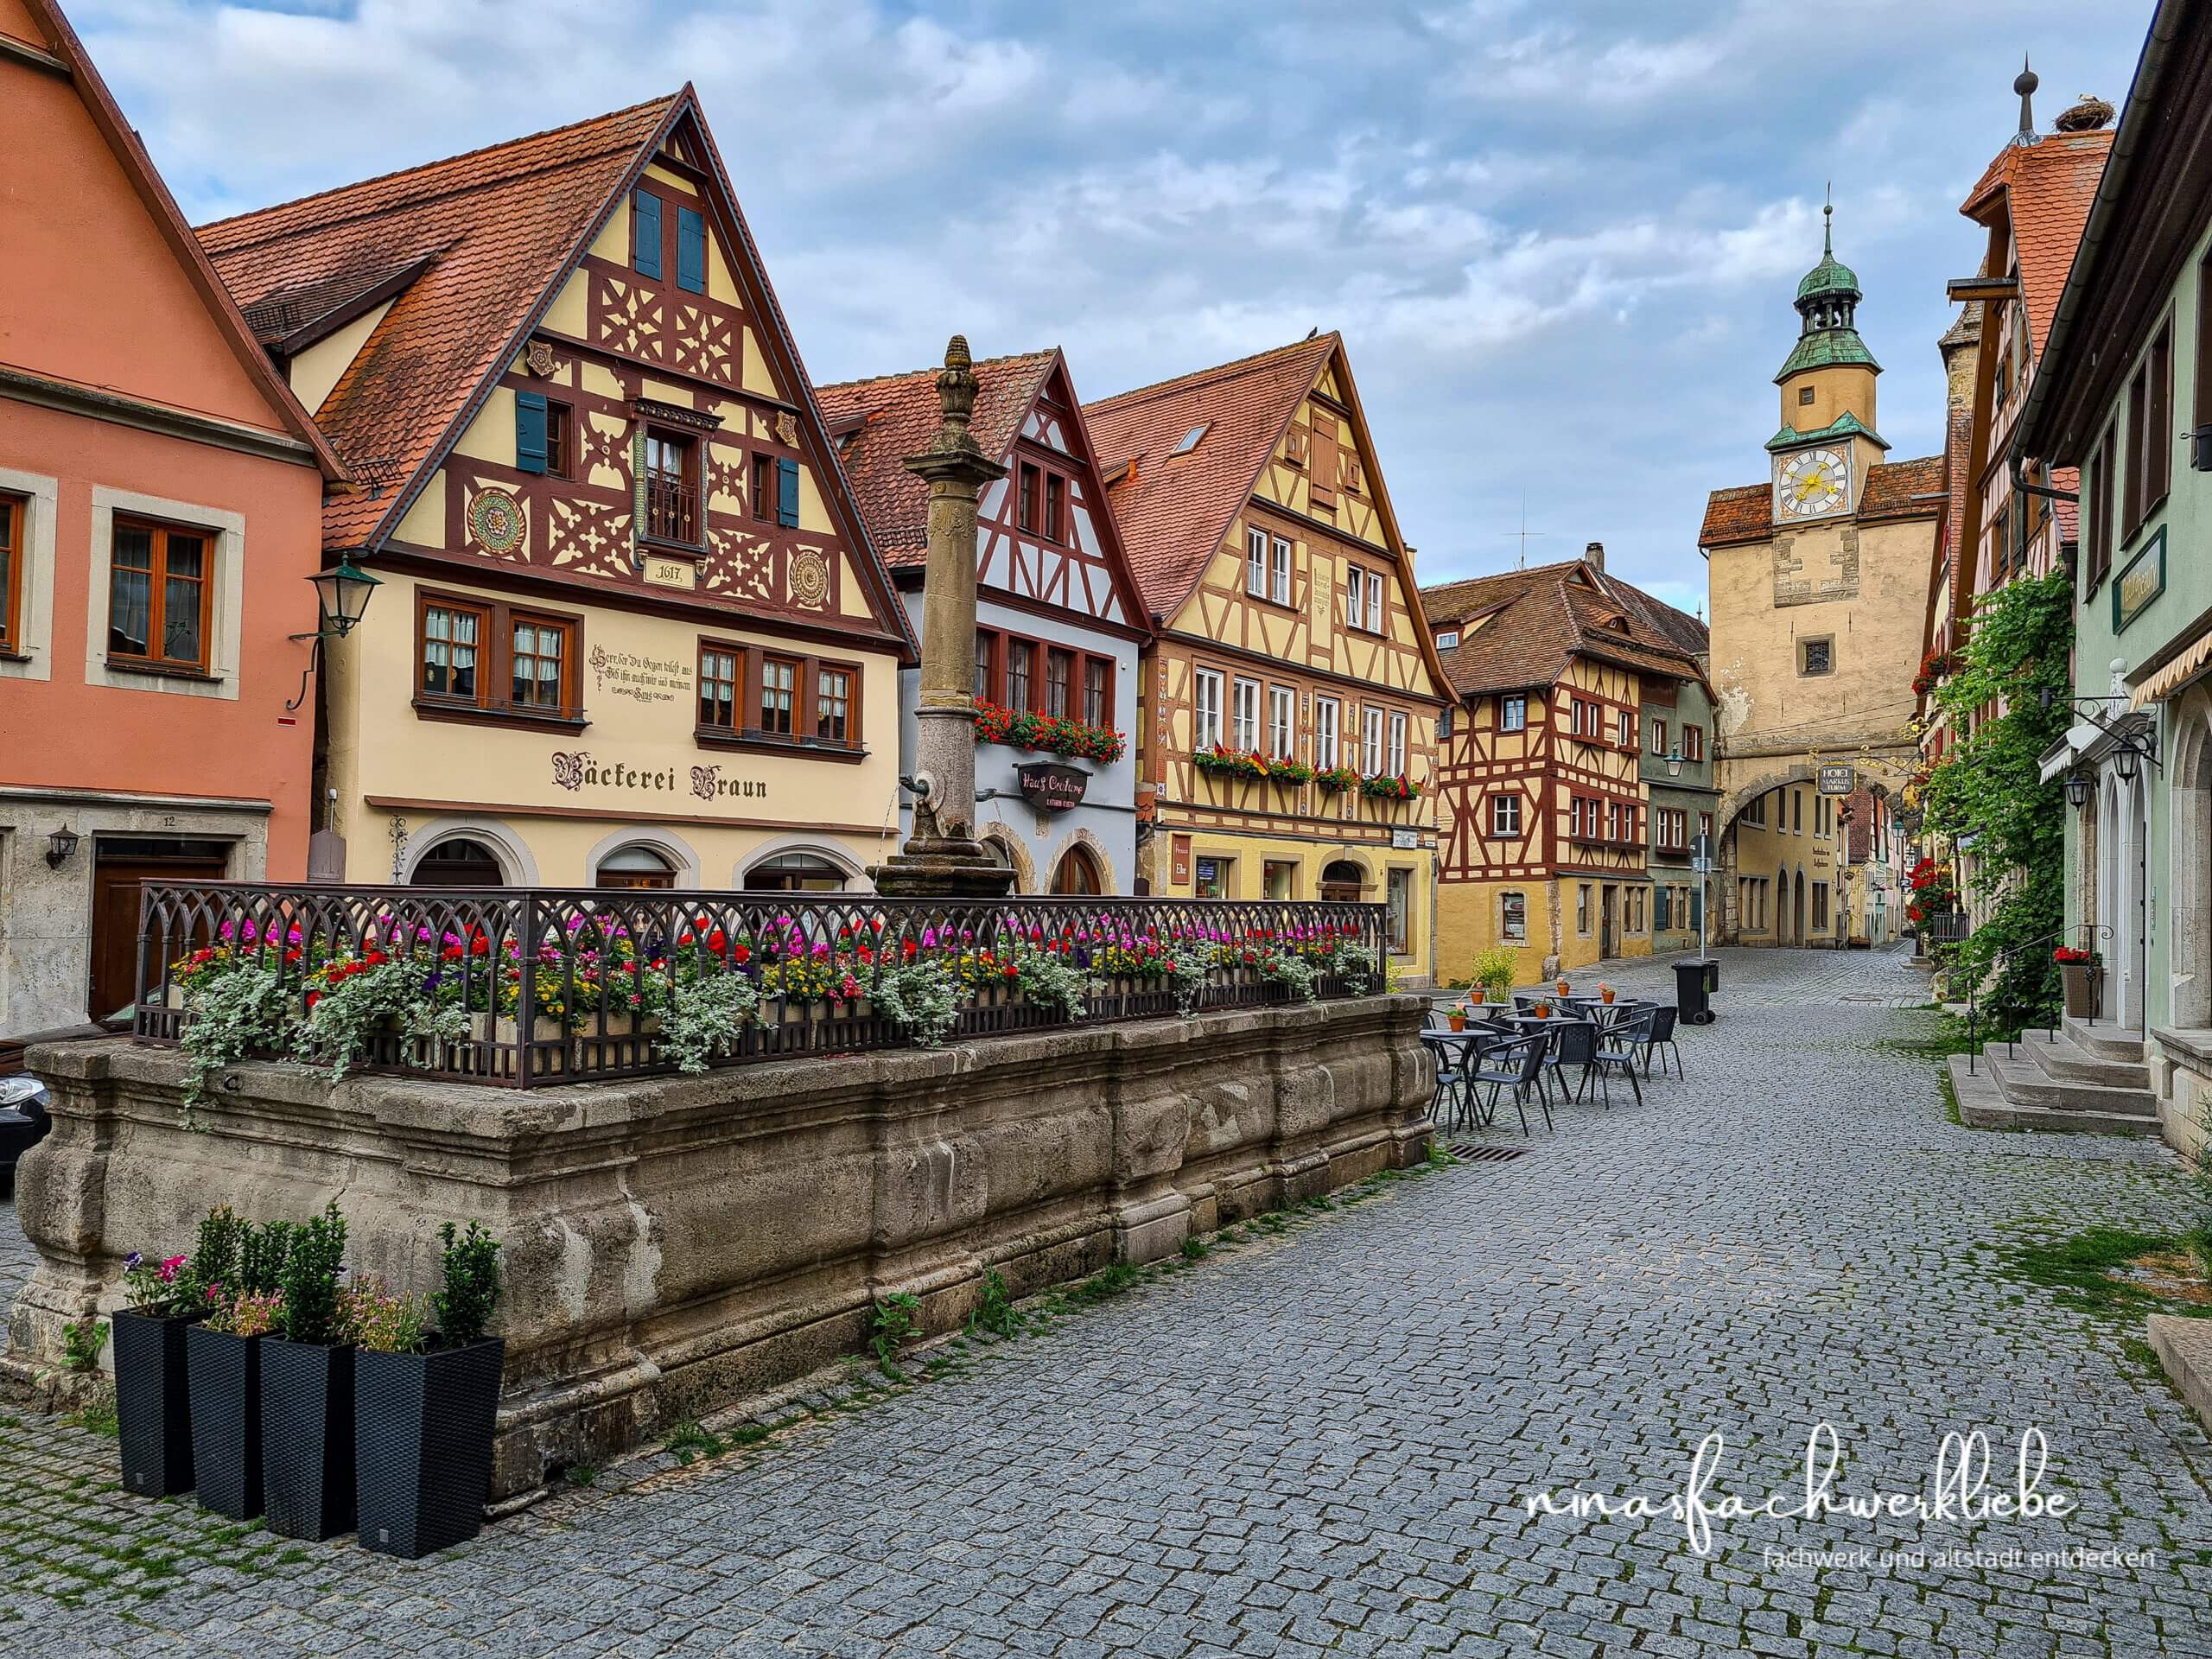 You are currently viewing Rothenburg ob der Tauber – Stadt mit Smile Faktor